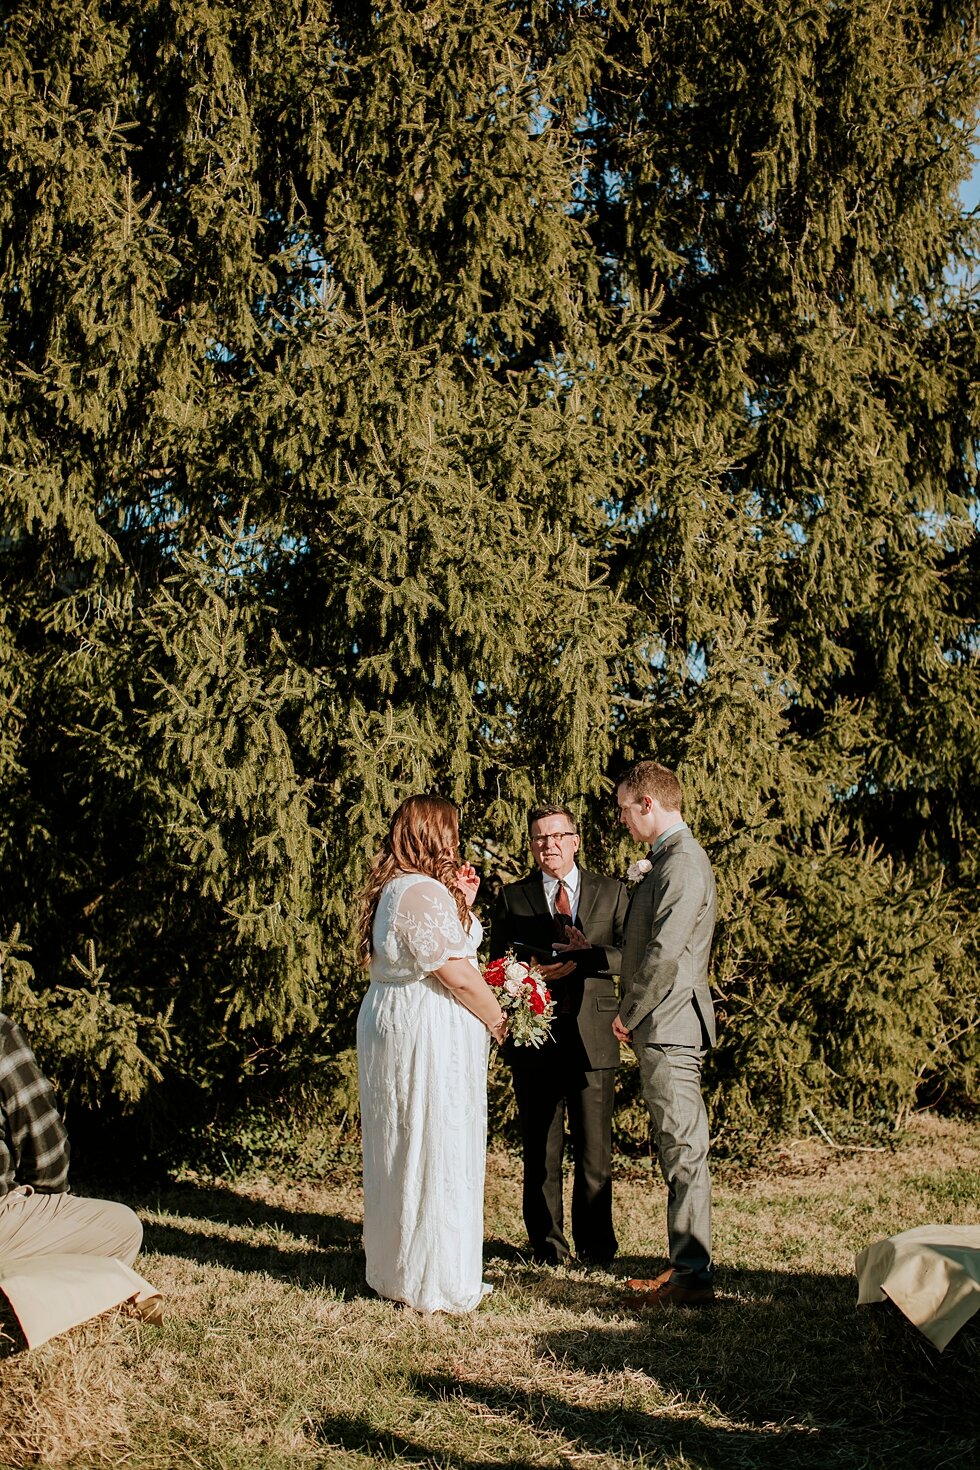  Exchanging vows during their outdoor wedding ceremony on the perfect wedding day for this southern bride and groom. Southern wedding Indiana intimate wedding small ceremony microceremony corydon indiana professional photographer #winterwedding #back